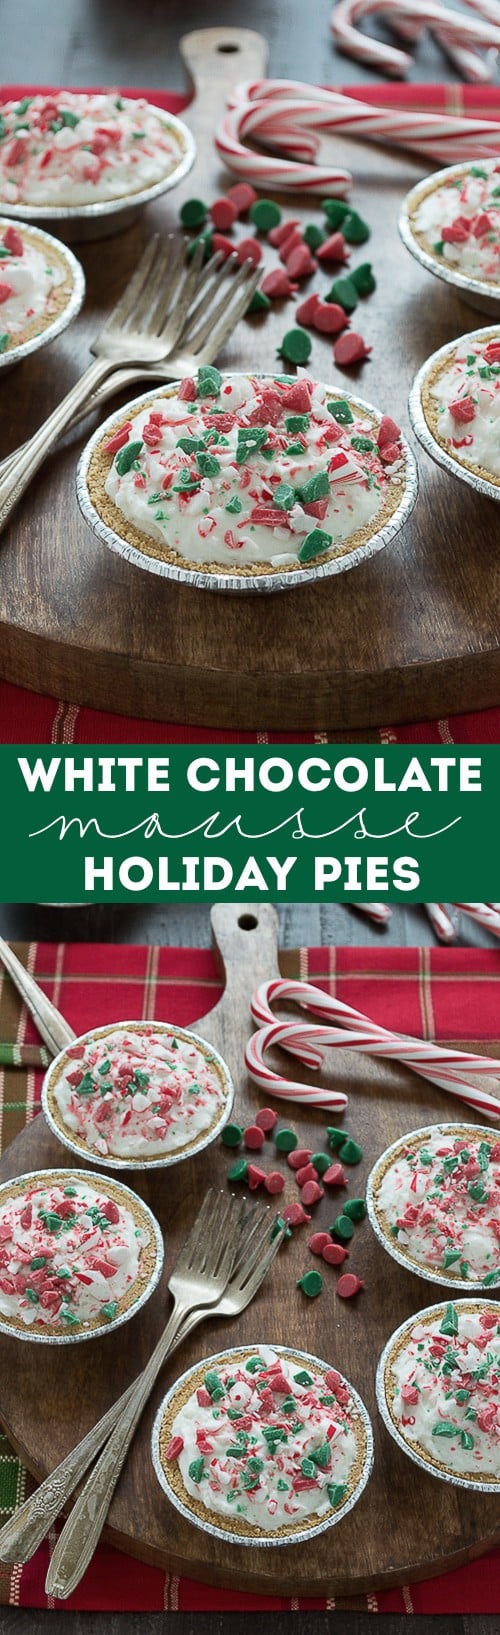 No bake mini white chocolate mousse pies are terrific for Christmas! Top them with red and green holiday chocolate chips!